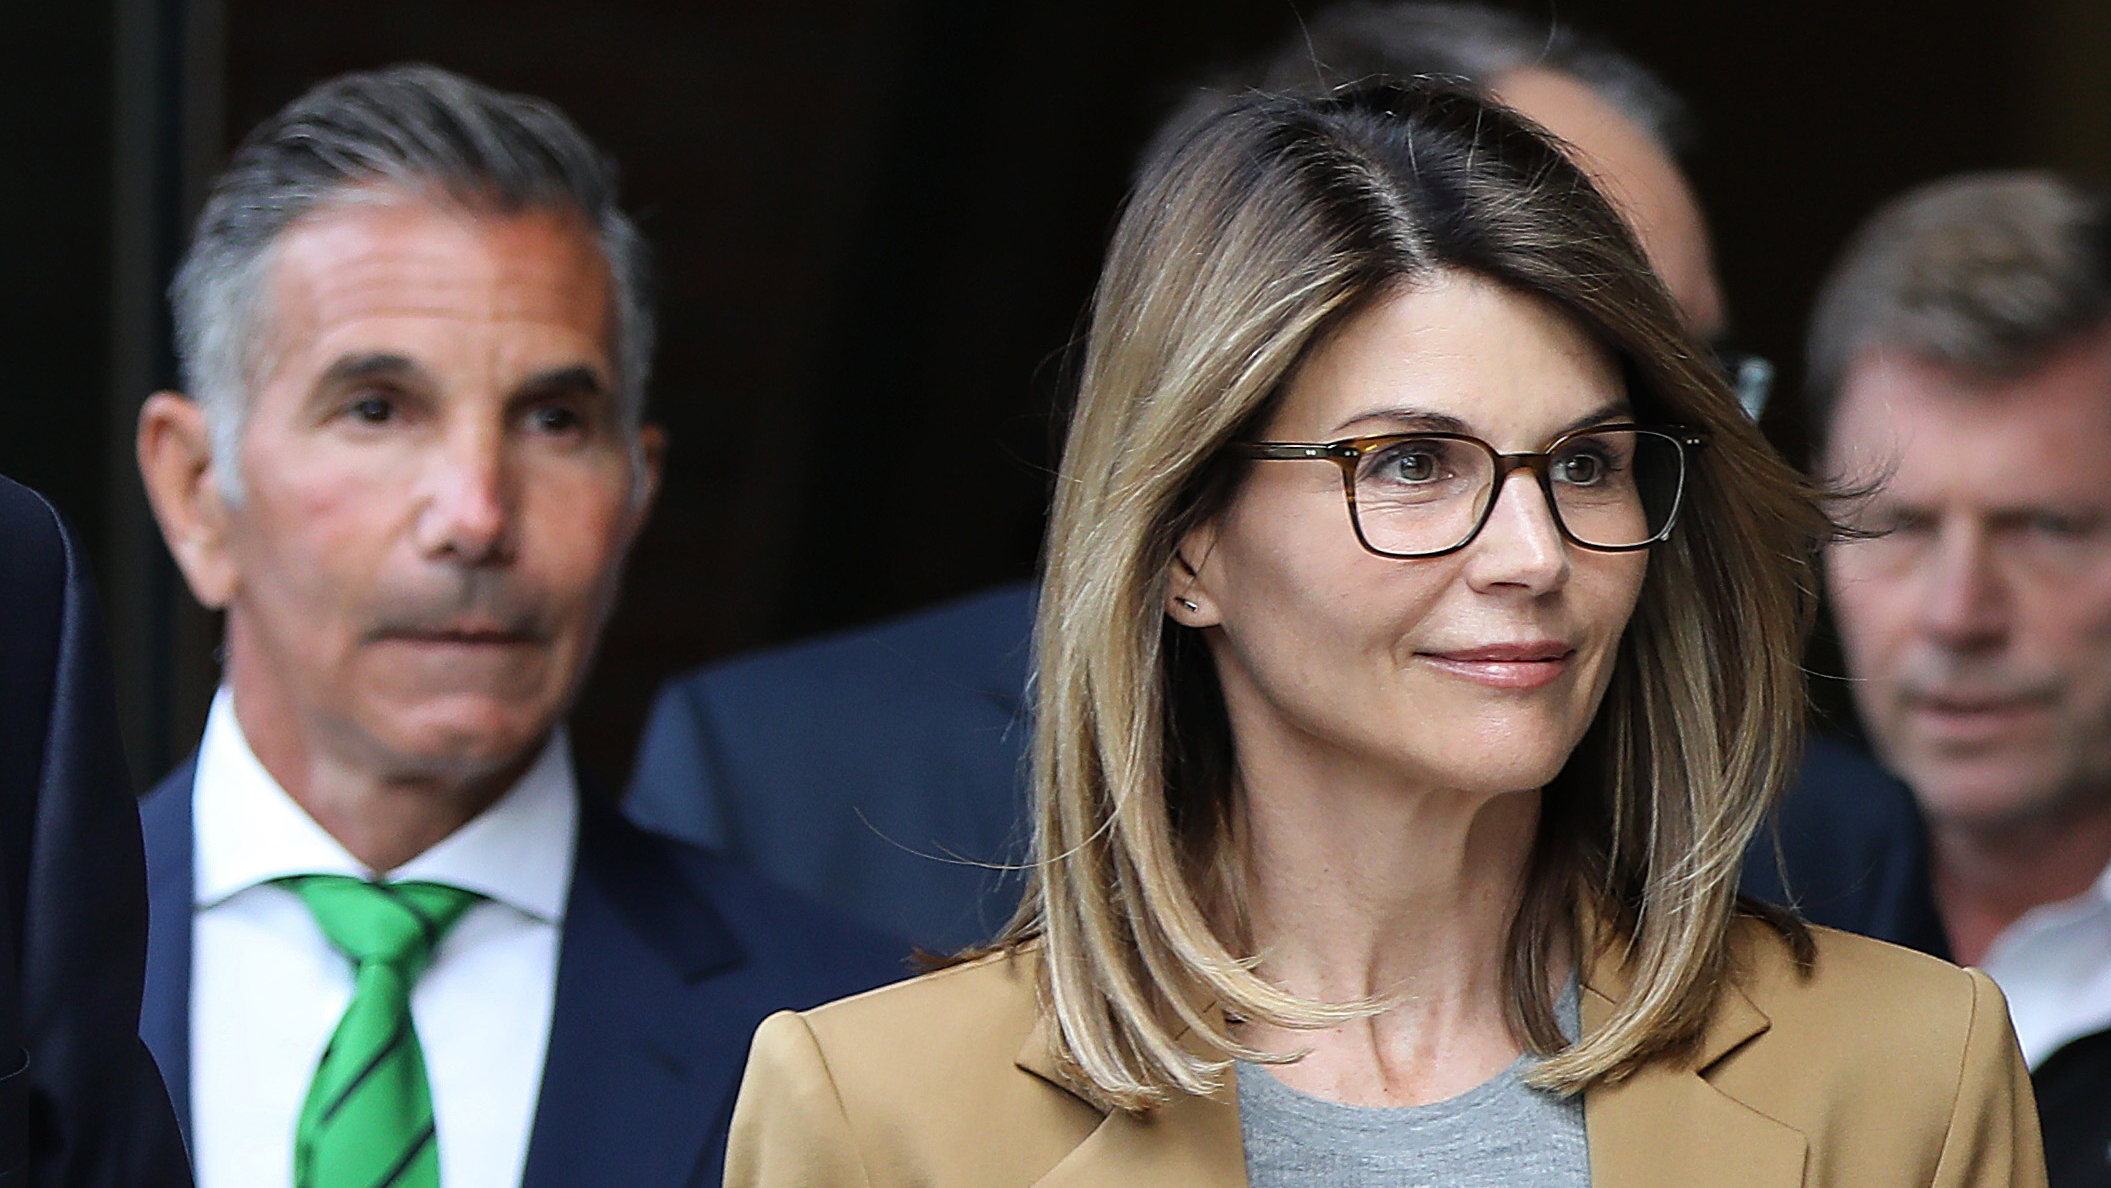 Actress Lori Loughlin and her designer husband Mossimo Giannulli will both serve prison time after paying to get their daughters into USC; Molly Line has an update.